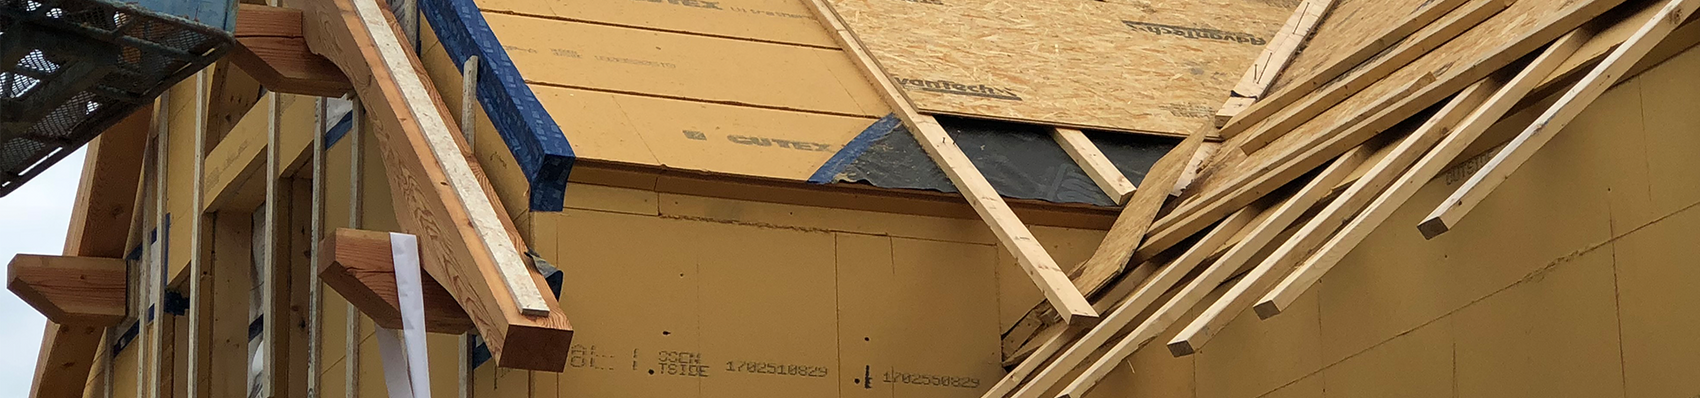 Gutex Wood Fiber Insulation: A Carbon Solution on Day One